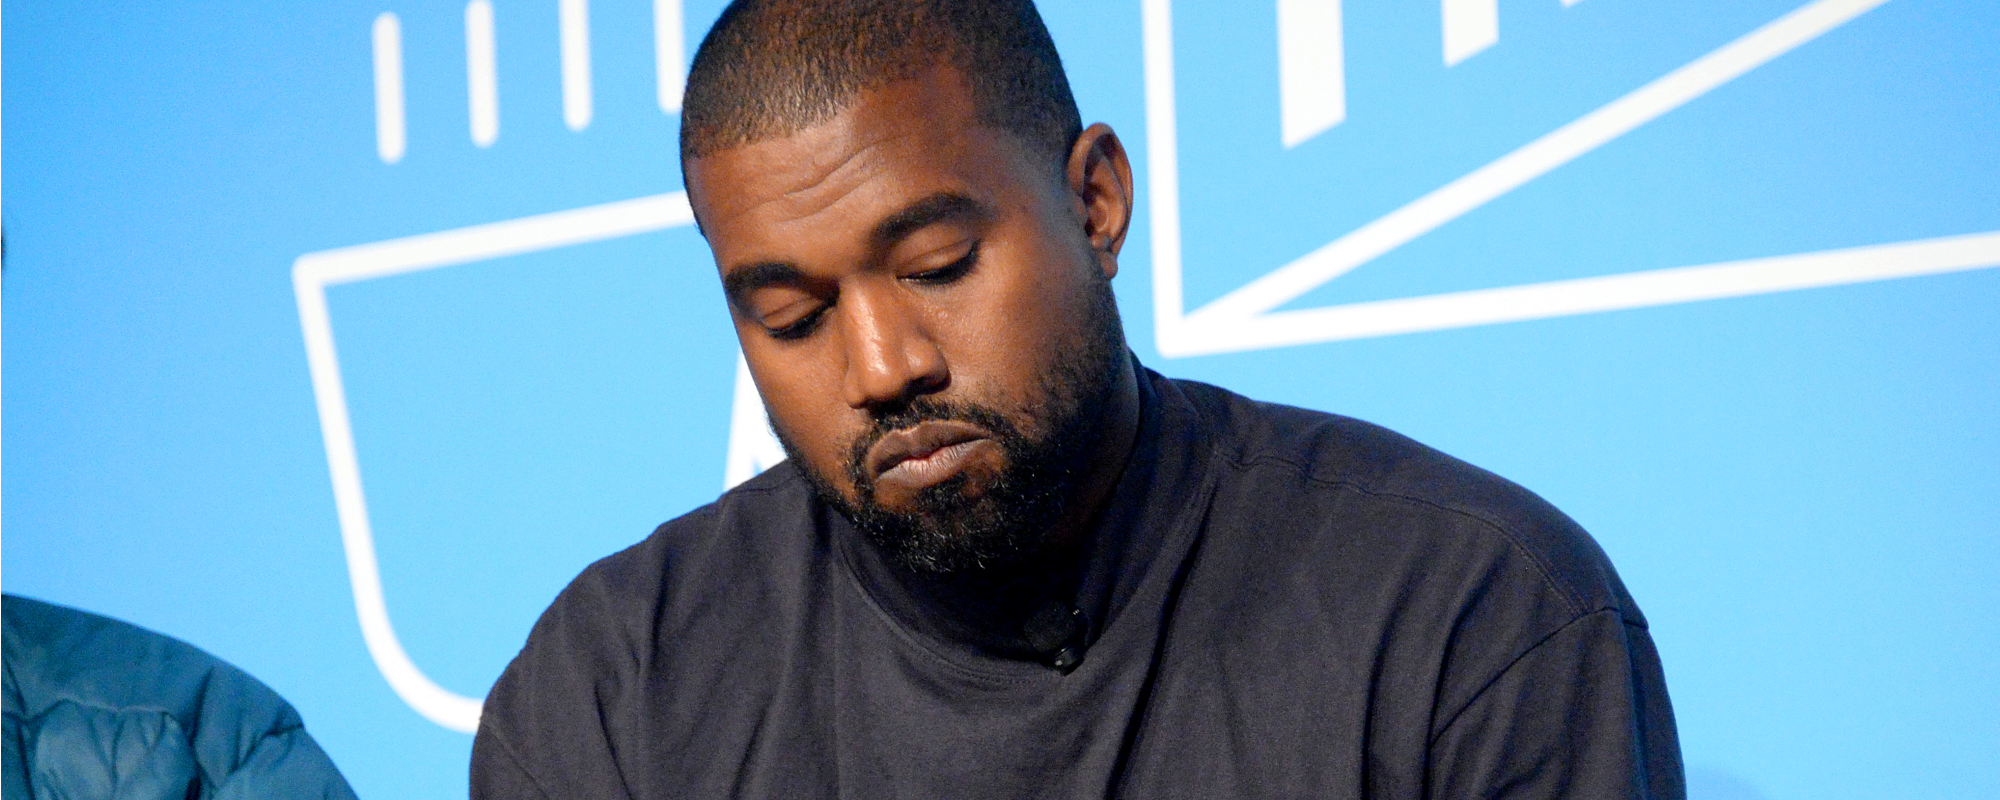 Fans Are Roasting Kanye West After Failing To Drop New ‘Vultures’ Album: “It’s Not a Kanye Album Without Delays”